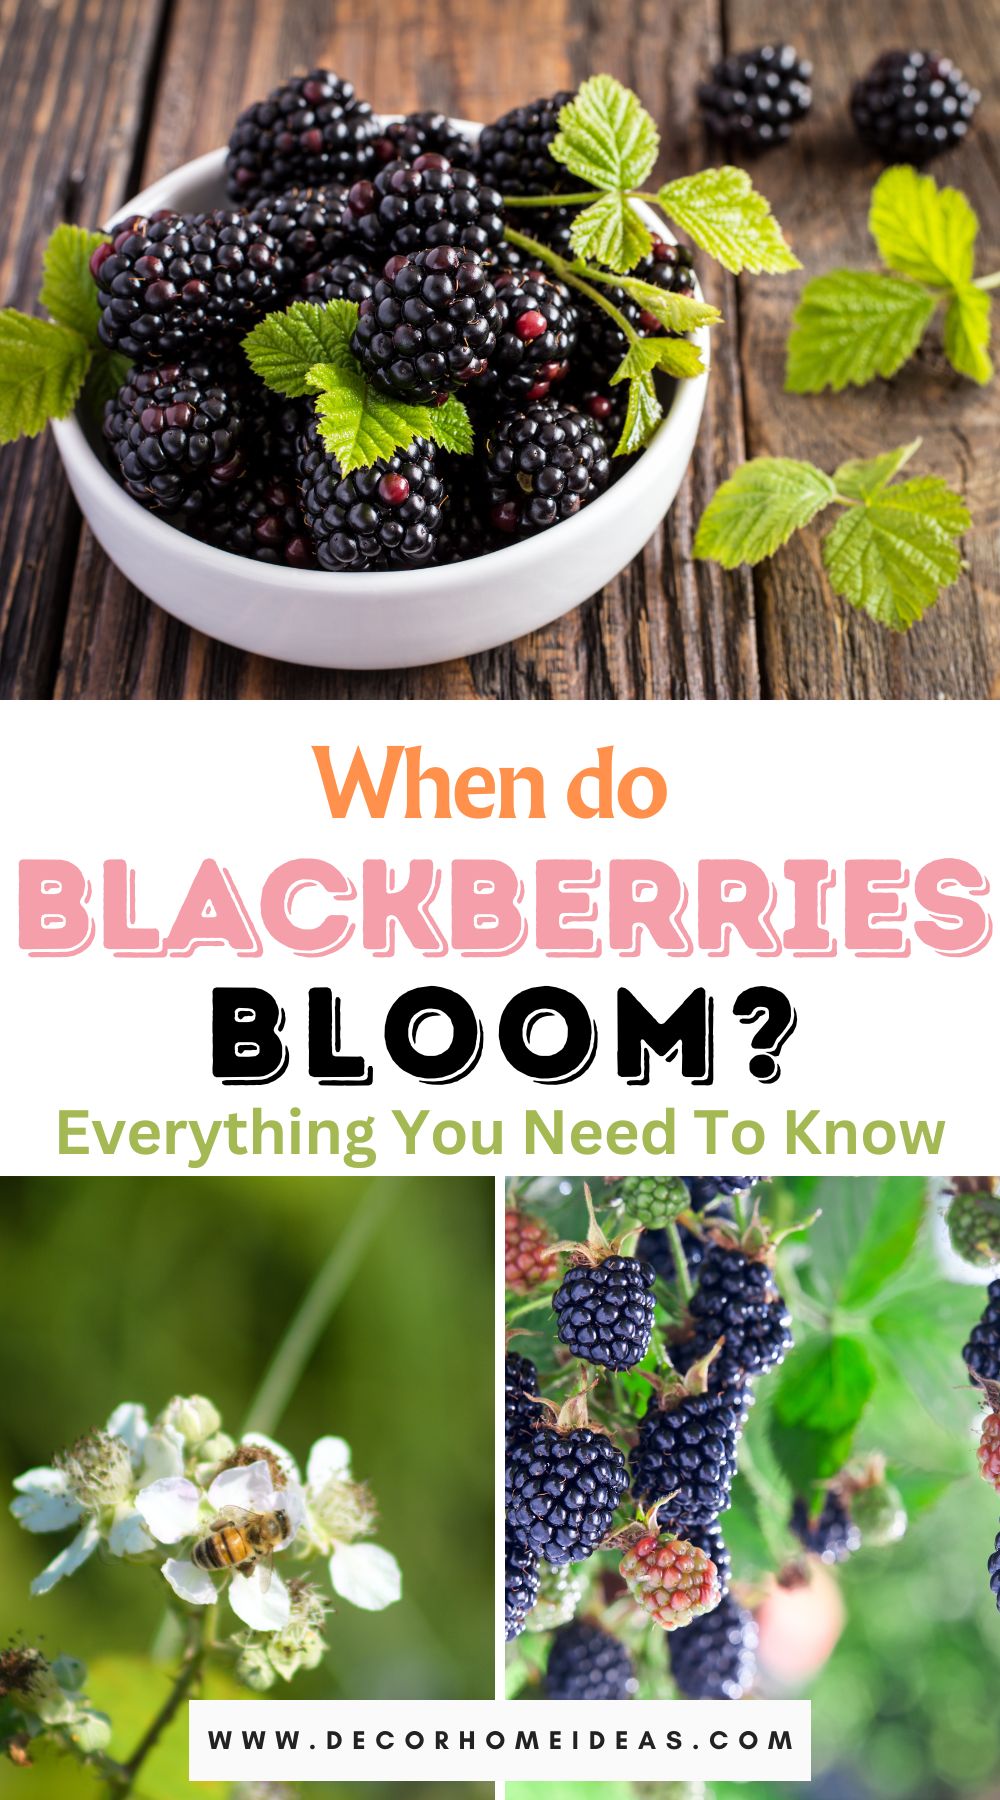 Unlock the beauty of blackberry blooms by learning when these luscious berries burst into springtime splendor. Explore the optimal conditions for blackberry blossoms and anticipate the vibrant bloom season with our insightful guide.